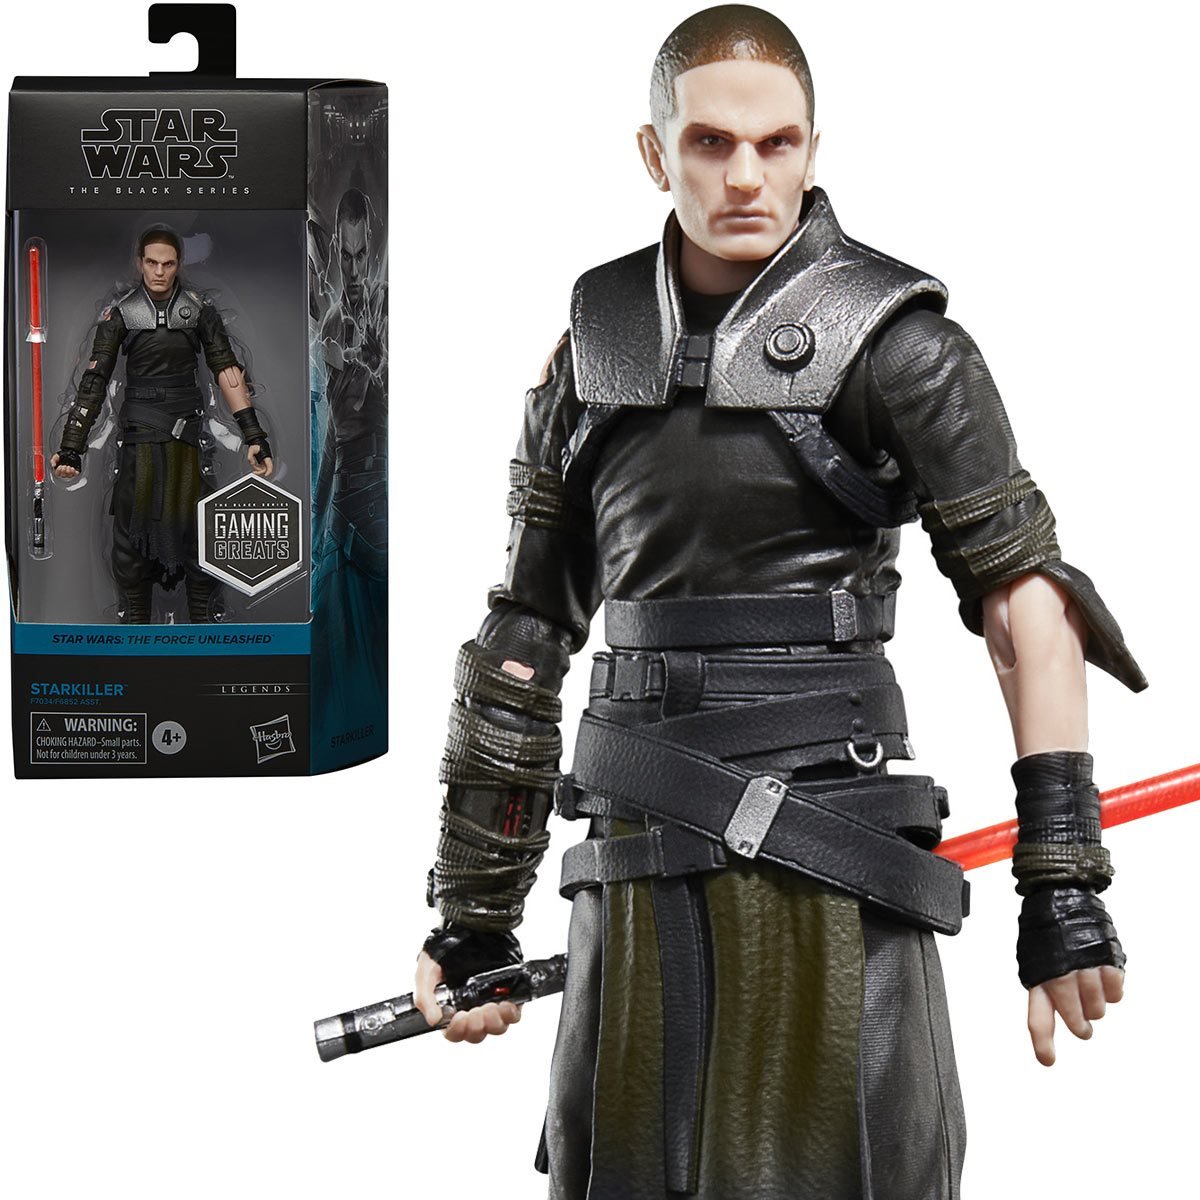 The Force Unleashed's Starkiller Gets The Star Wars Black Series Treatment